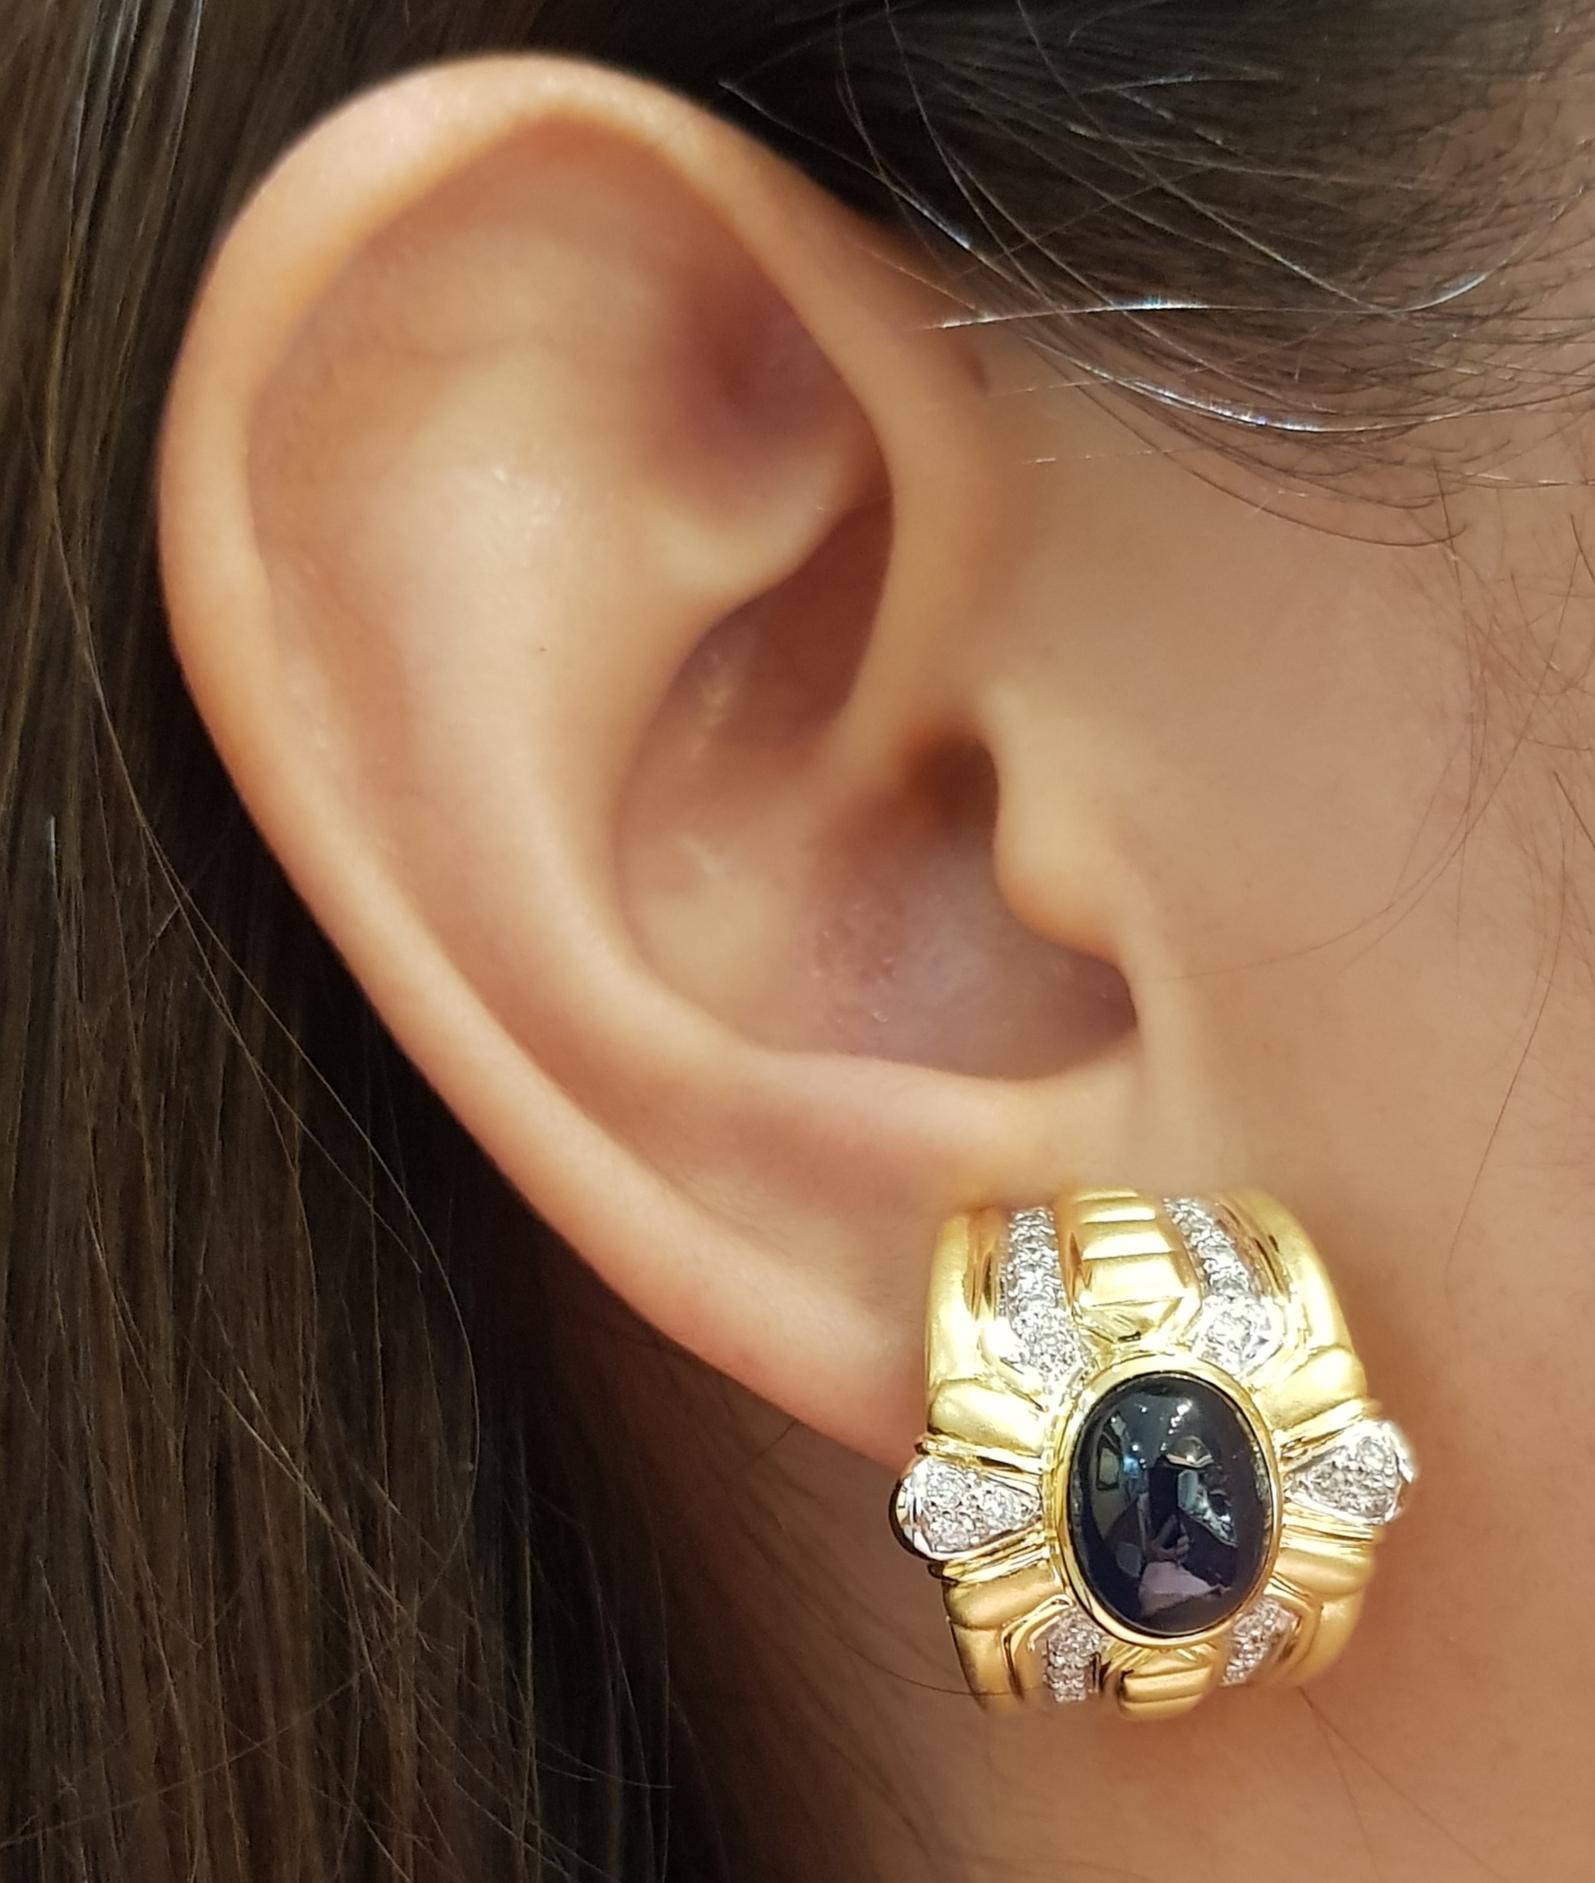 Cabochon Blue Sapphire 9.41 carats with Diamond 0.71 carat Earrings set in 18 Karat Gold Settings

Width:  2.0 cm 
Length: 2.2 cm
Total Weight: 29.19  grams

